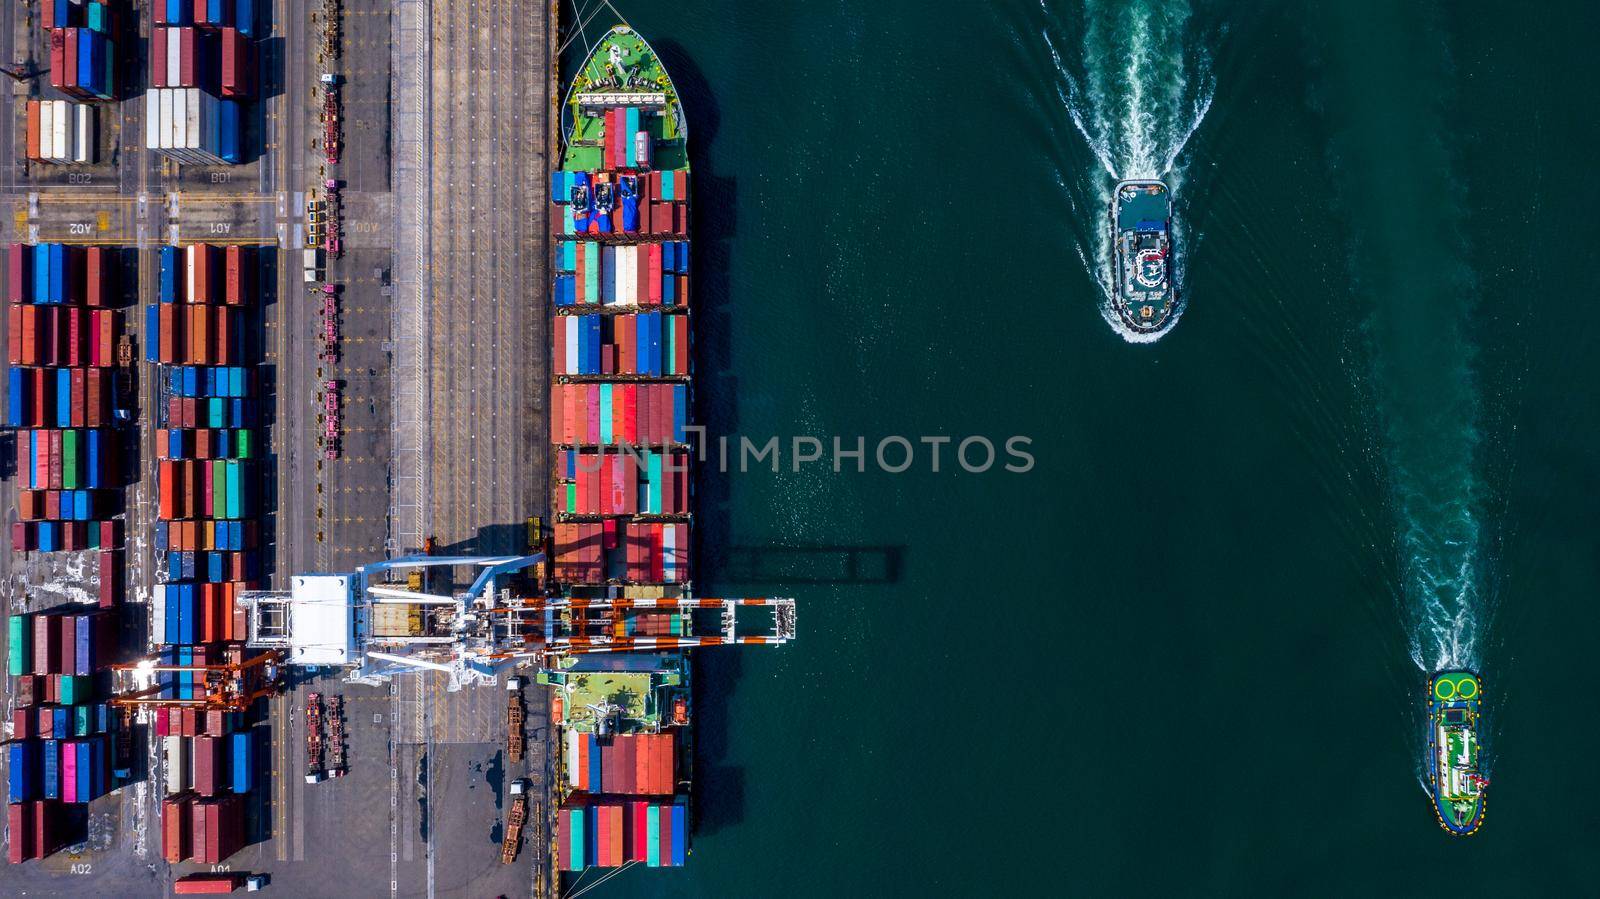 Container ship carrying container box in import export to commercial port, Global business cargo freight shipping commercial trade logistic and transportation oversea worldwide by container vessel. by AvigatoR